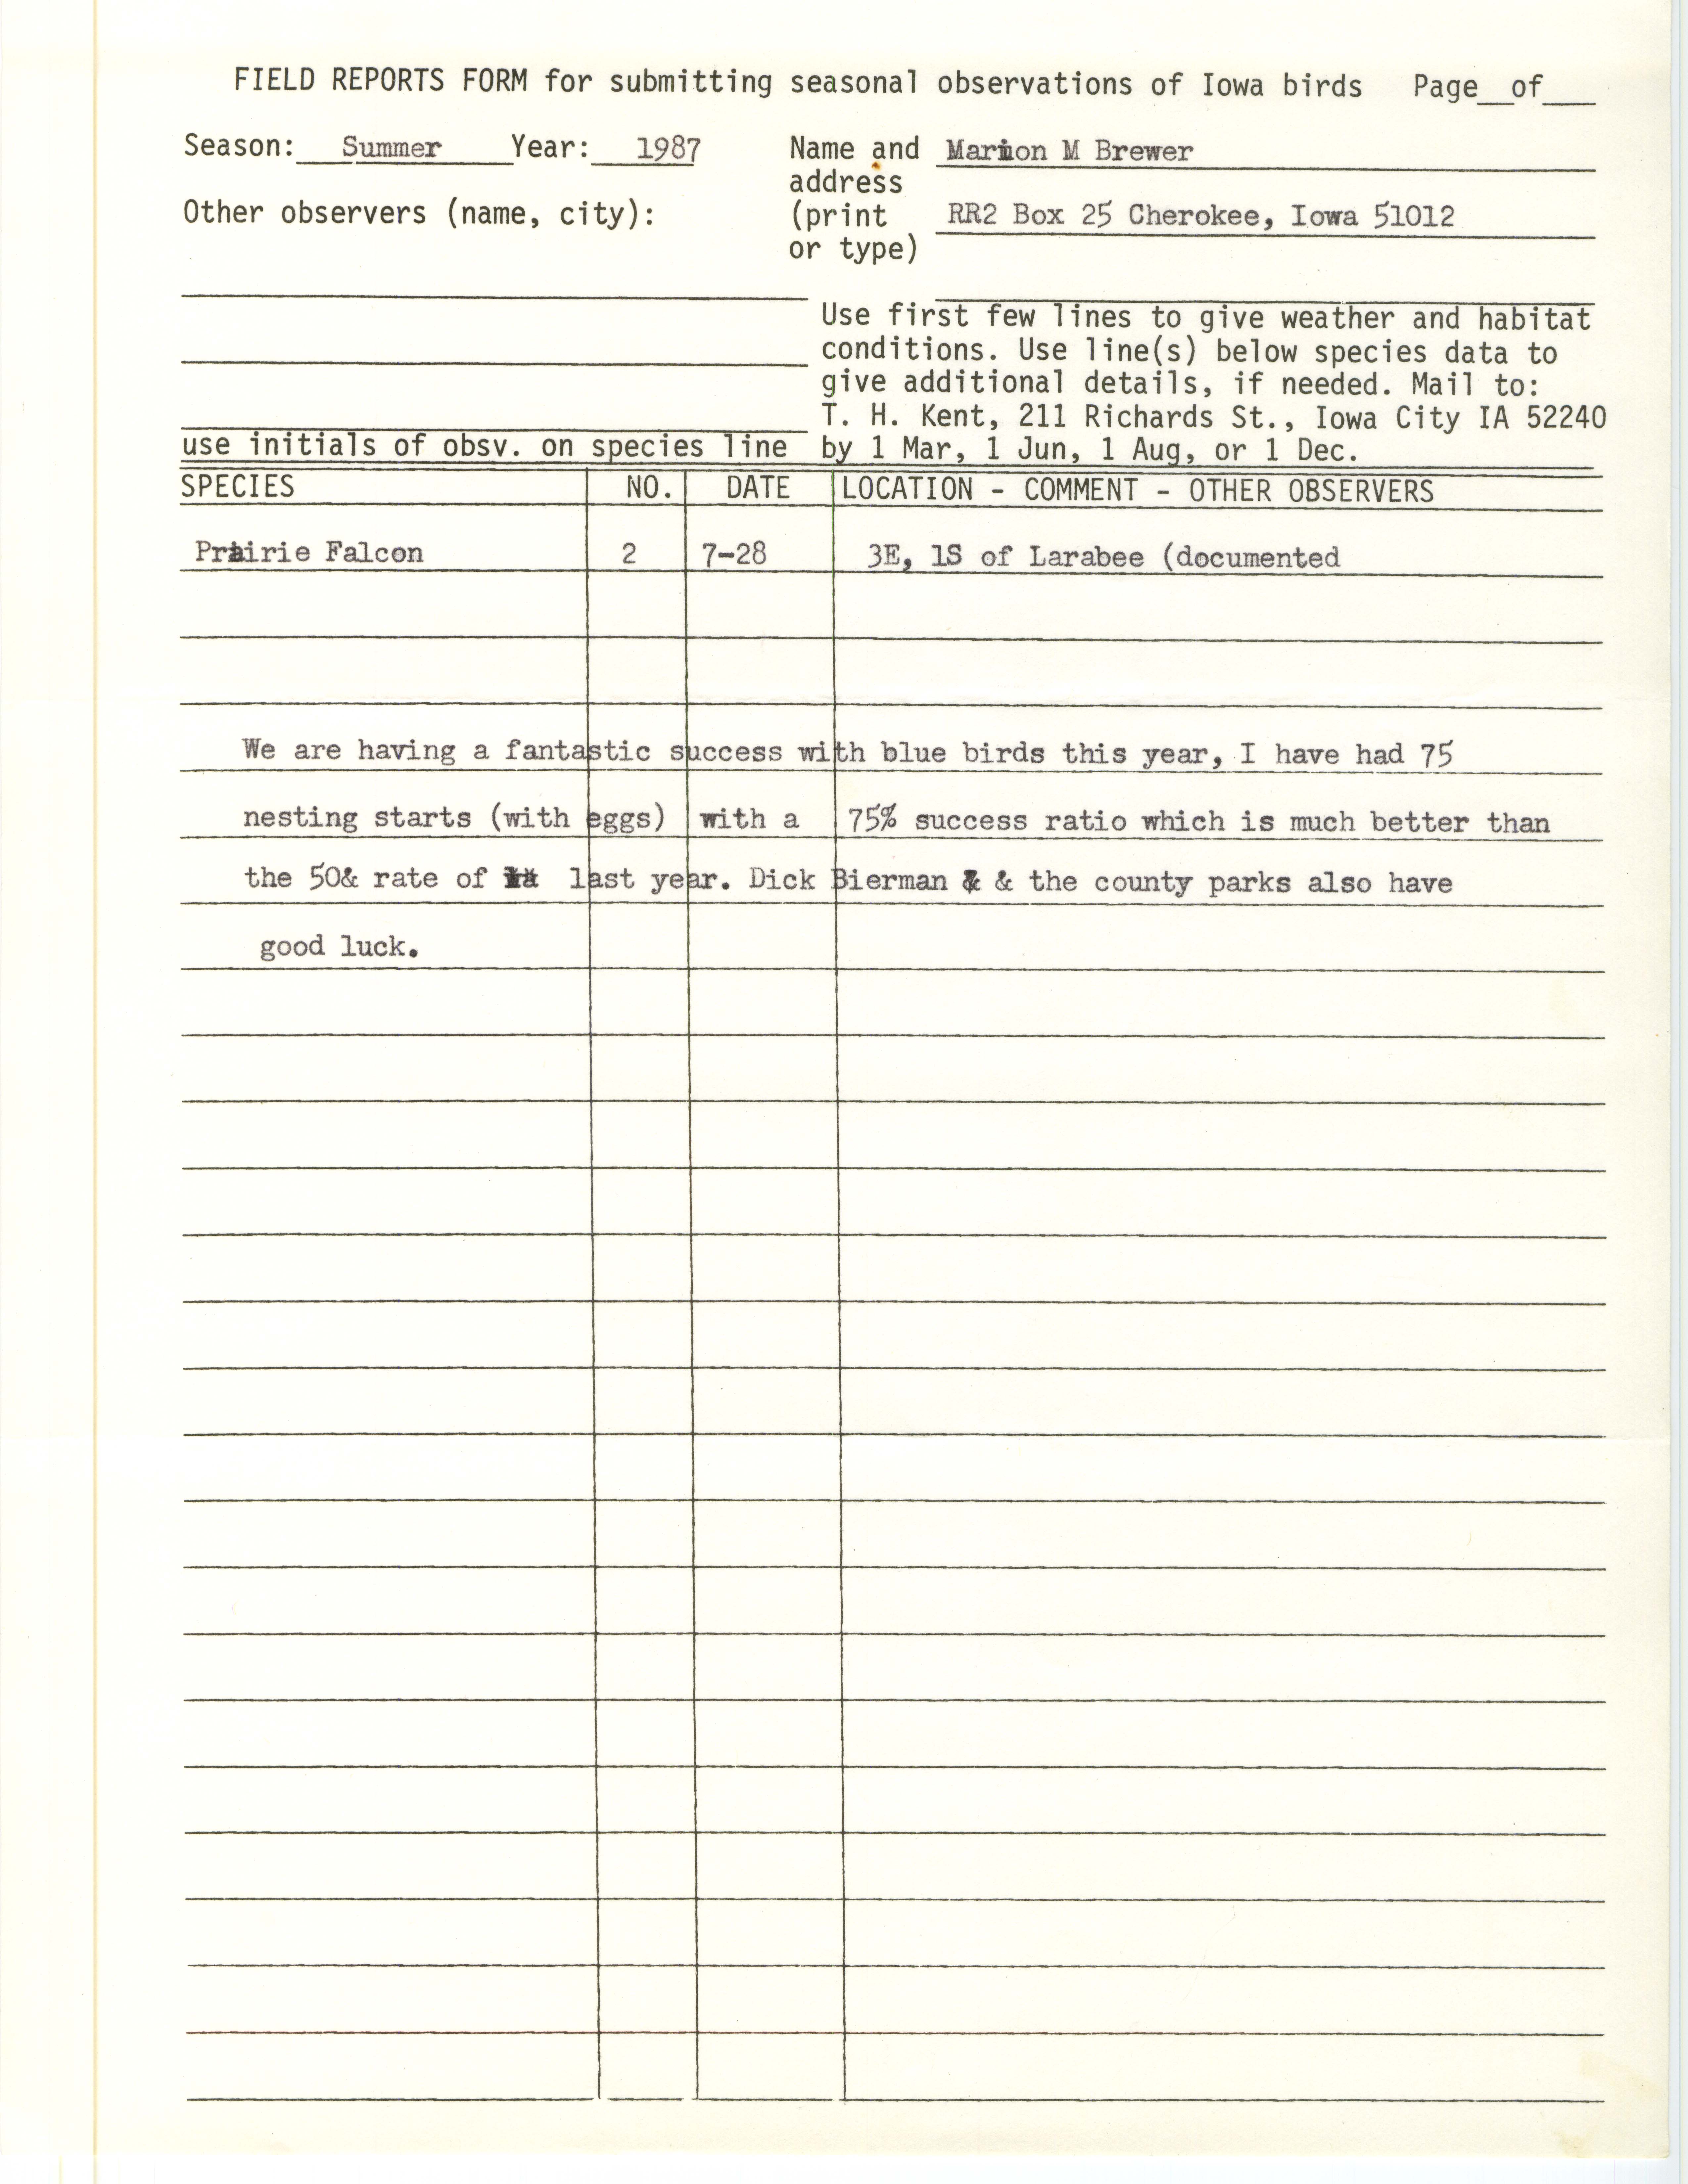 Field reports form for submitting seasonal observations of Iowa birds, Marion M. Brewer, summer 1987